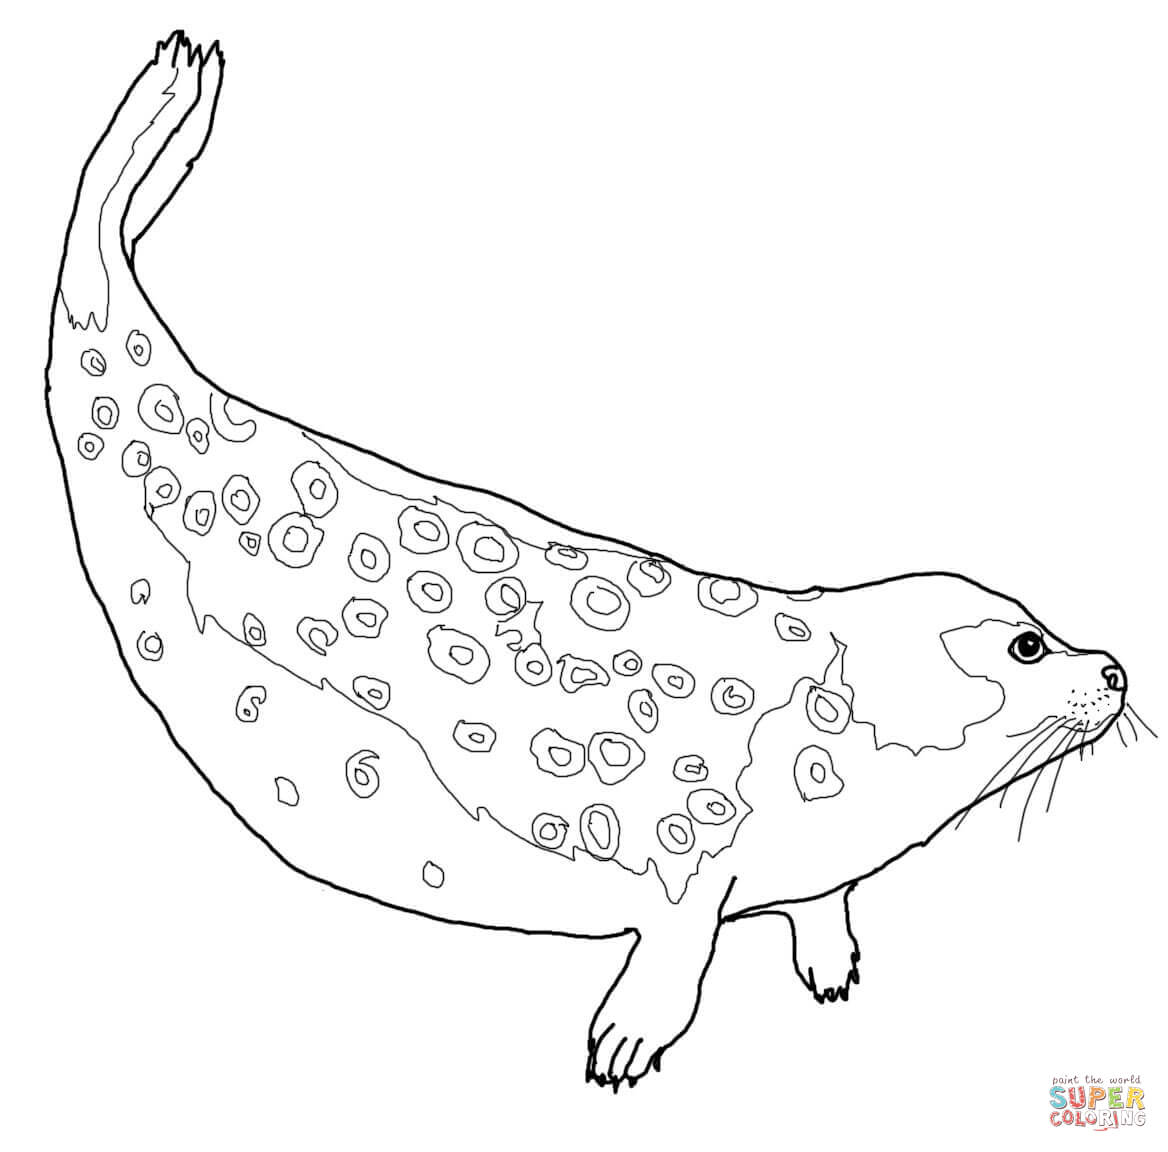 Elephant Seal coloring #3, Download drawings